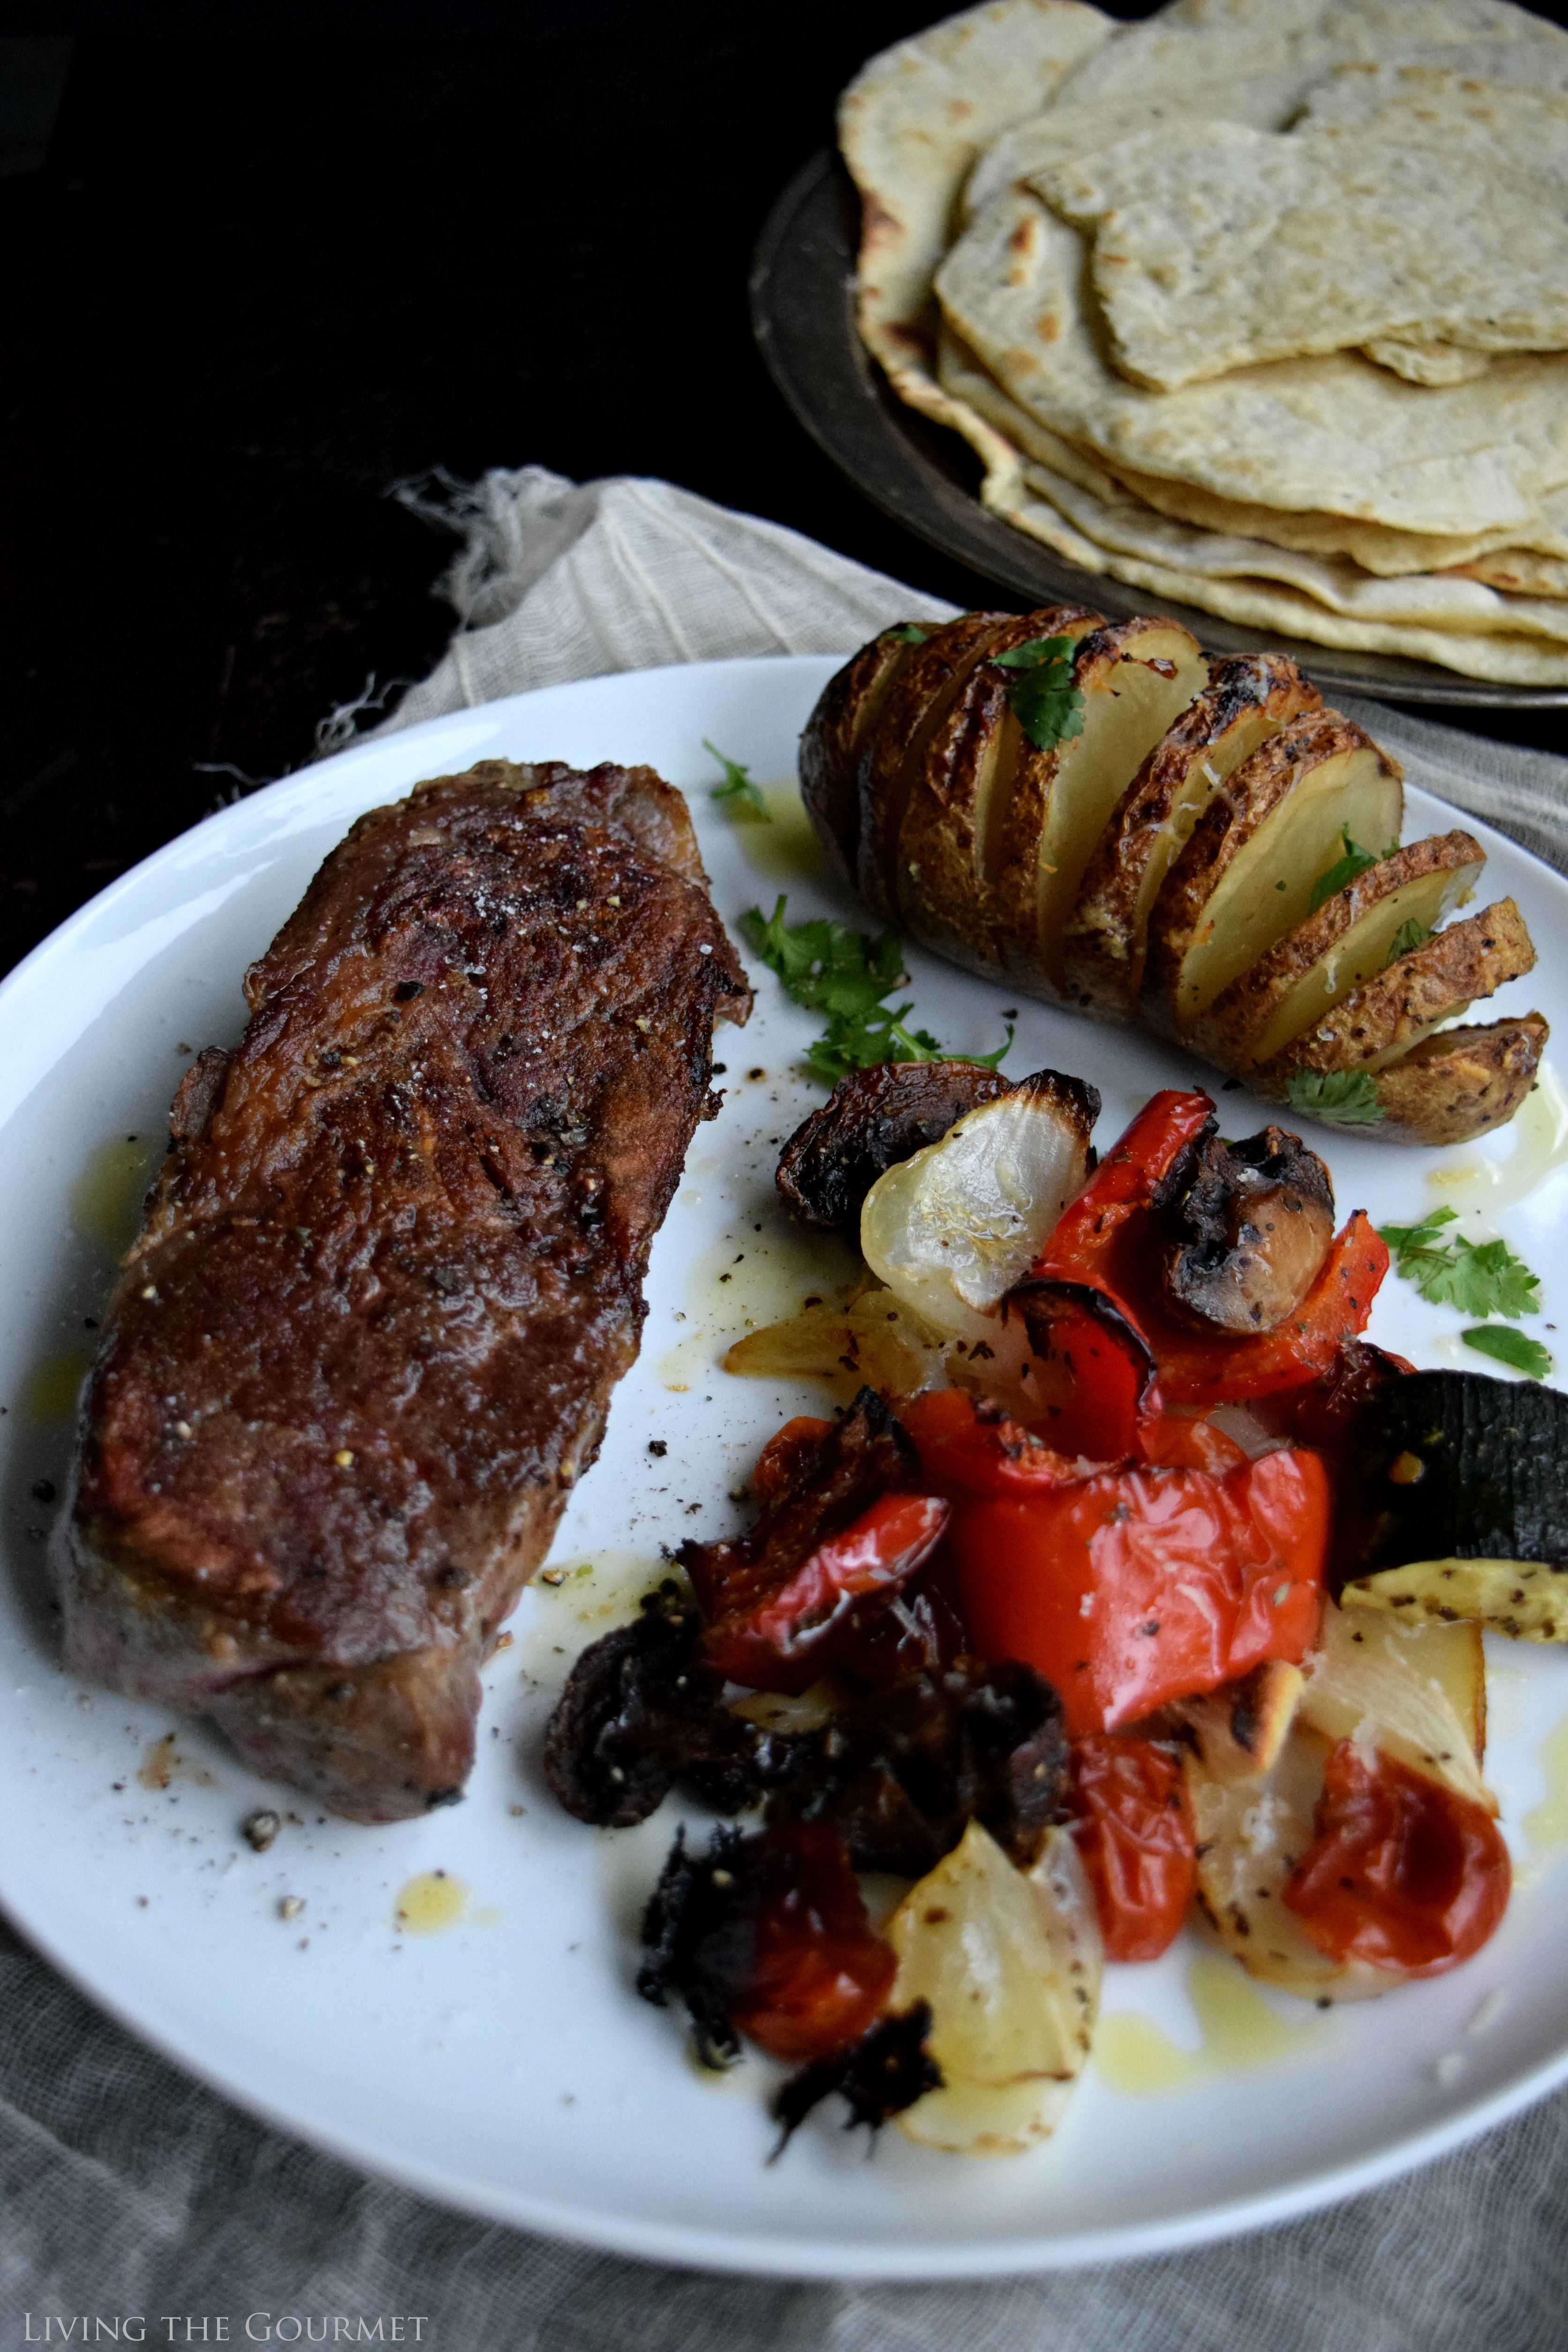 Living the Gourmet: Grilled Beef Ribeye Steaks with Hasselback Potatoes & Roasted Vegetables ft. ButcherBox